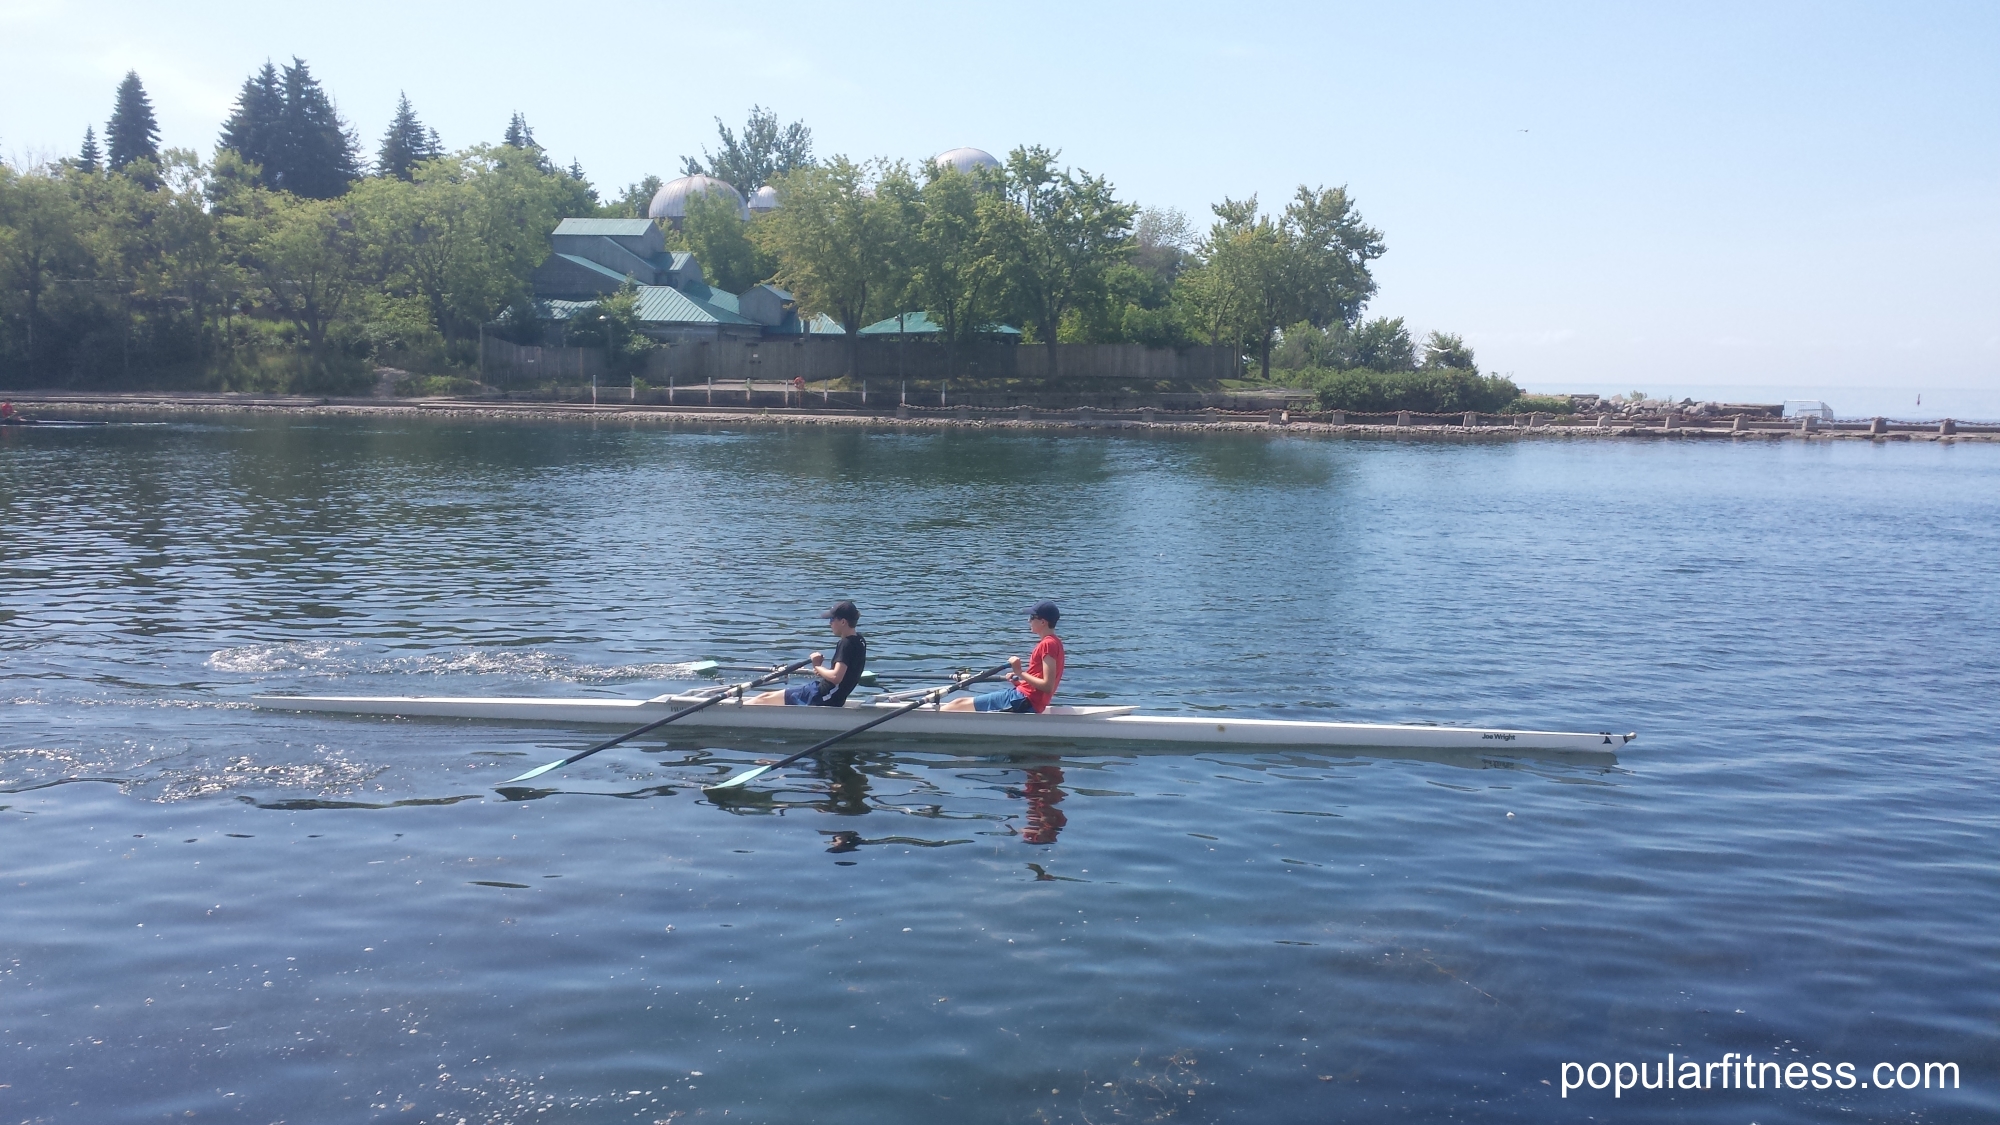 Double scull rowing exercise on Lake Ontario - photo by popular fitness